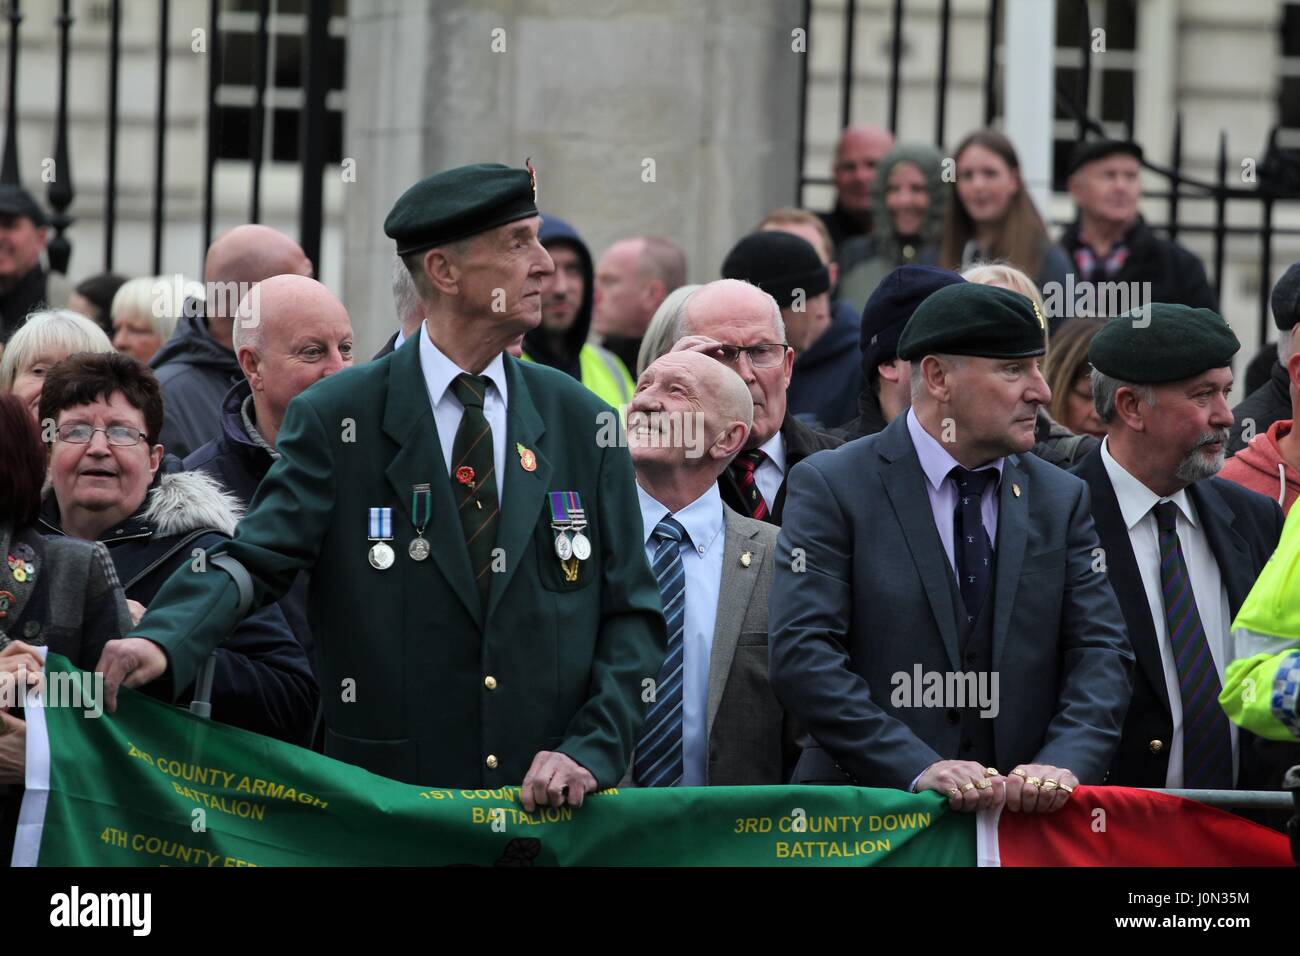 Belfast, UK. 14th Apr, 2017. A number of military veterans where present at a rally in Belfast Credit: Conall Kearney/Alamy Live News Stock Photo